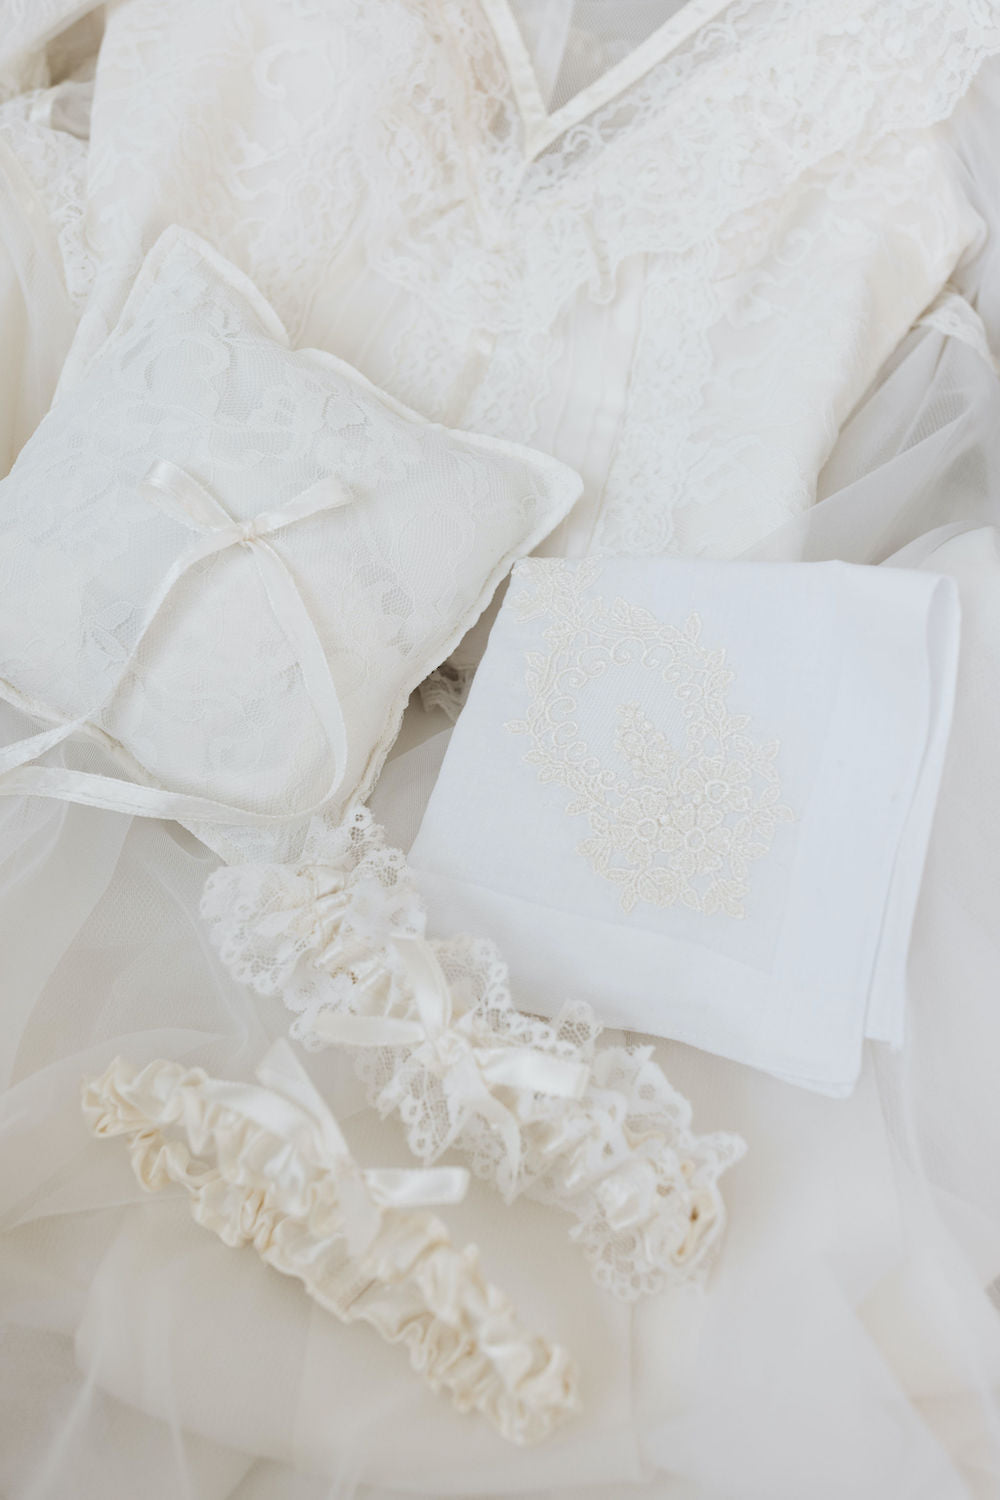 wedding garter set, ring pillow & handkerchief handmade from the bride's mother's lace wedding dress, bridal accessory designed by The Garter Girl